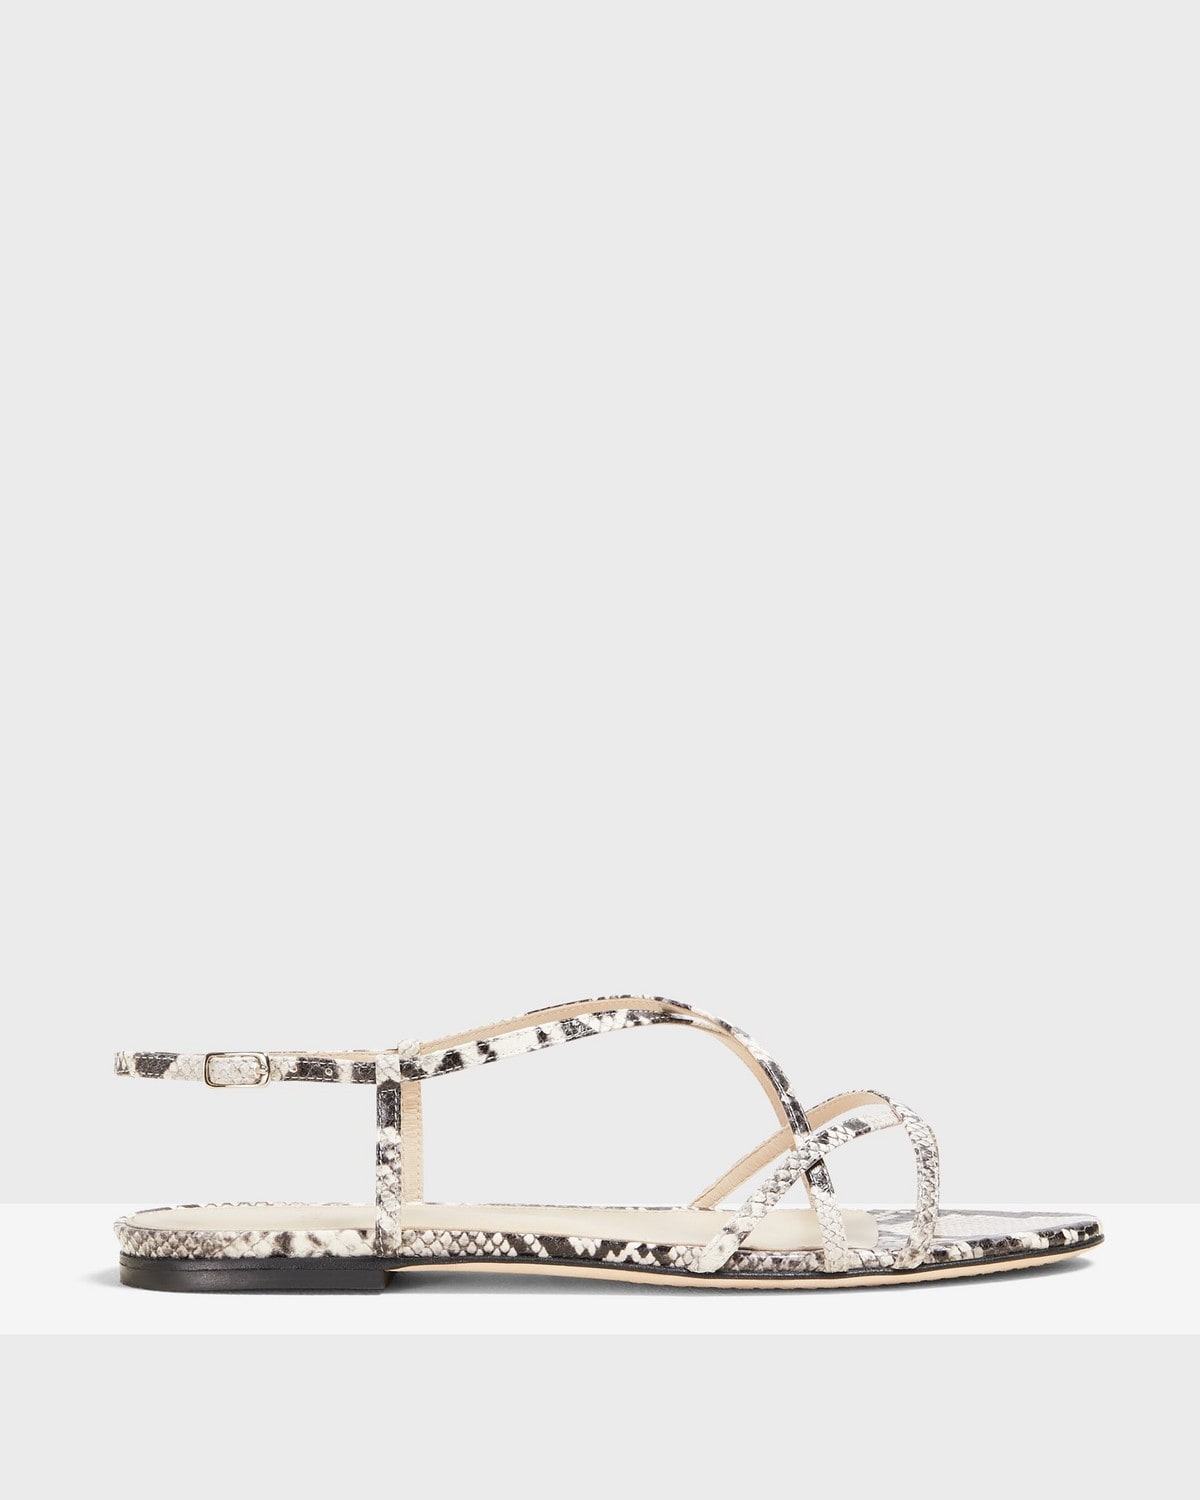 Theory Strappy Flat Sandal in Python Print Leather